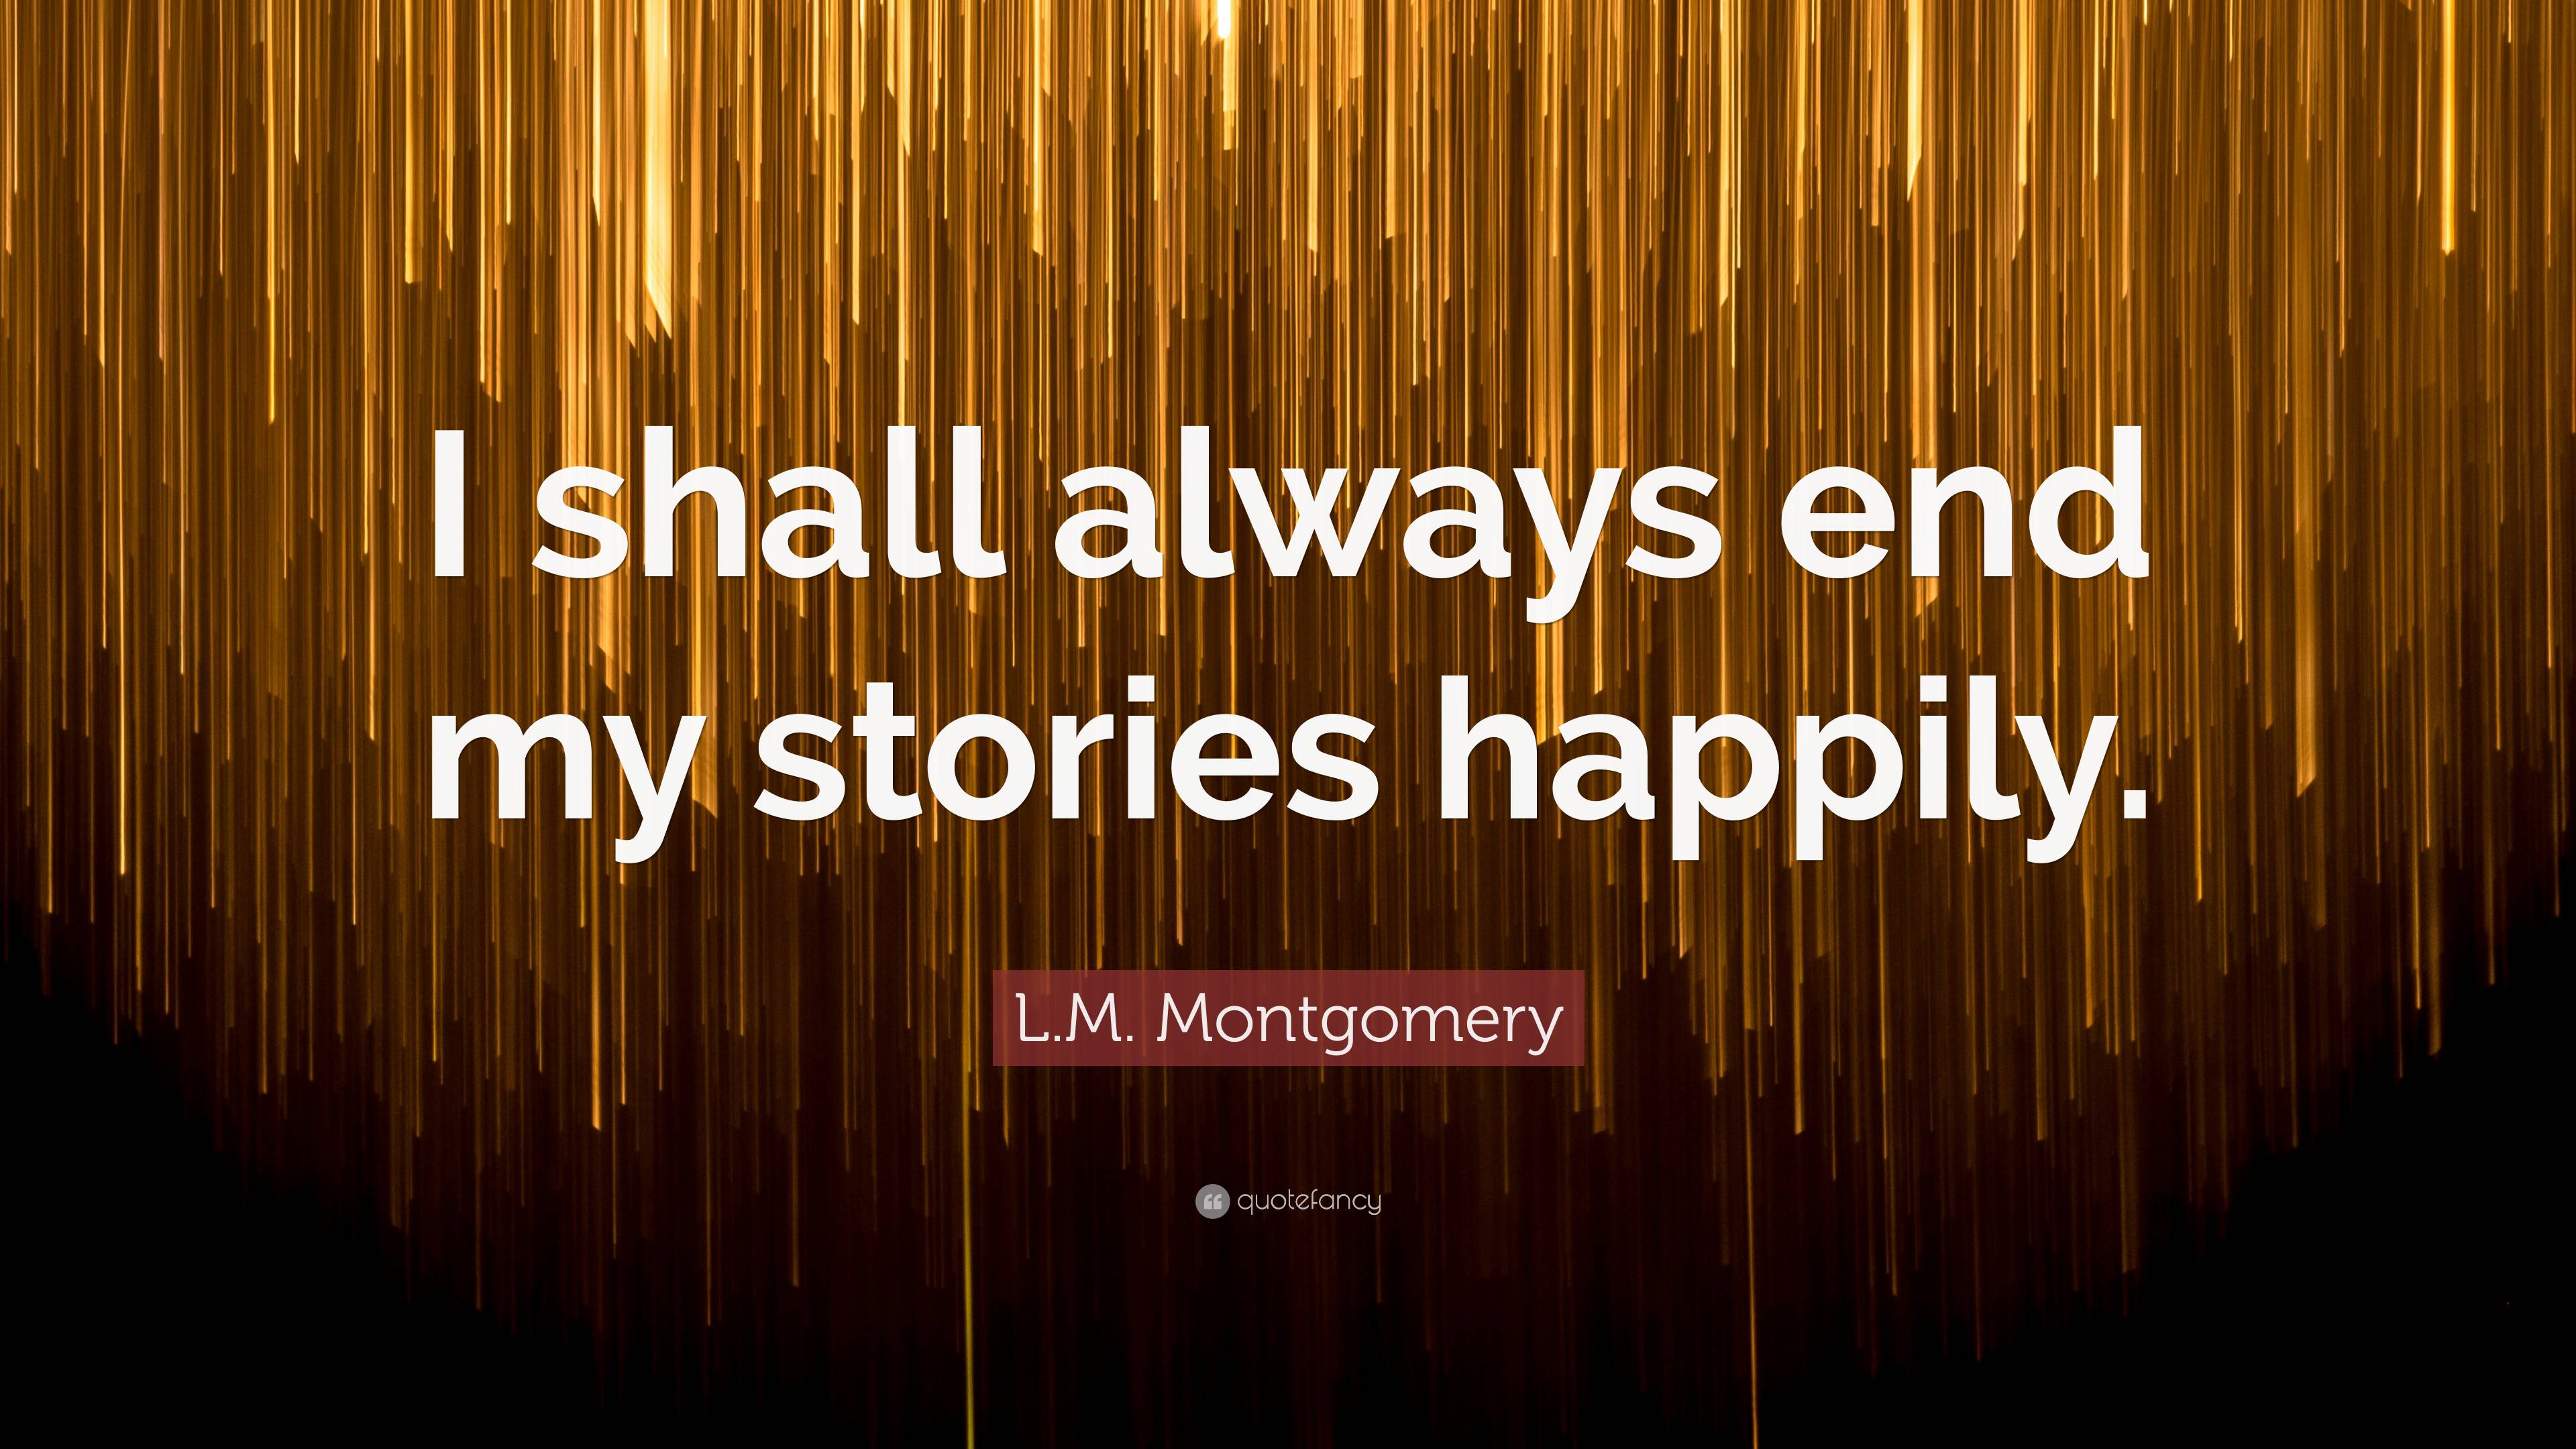 L.M. Montgomery Quote: “I shall always end my stories happily.”